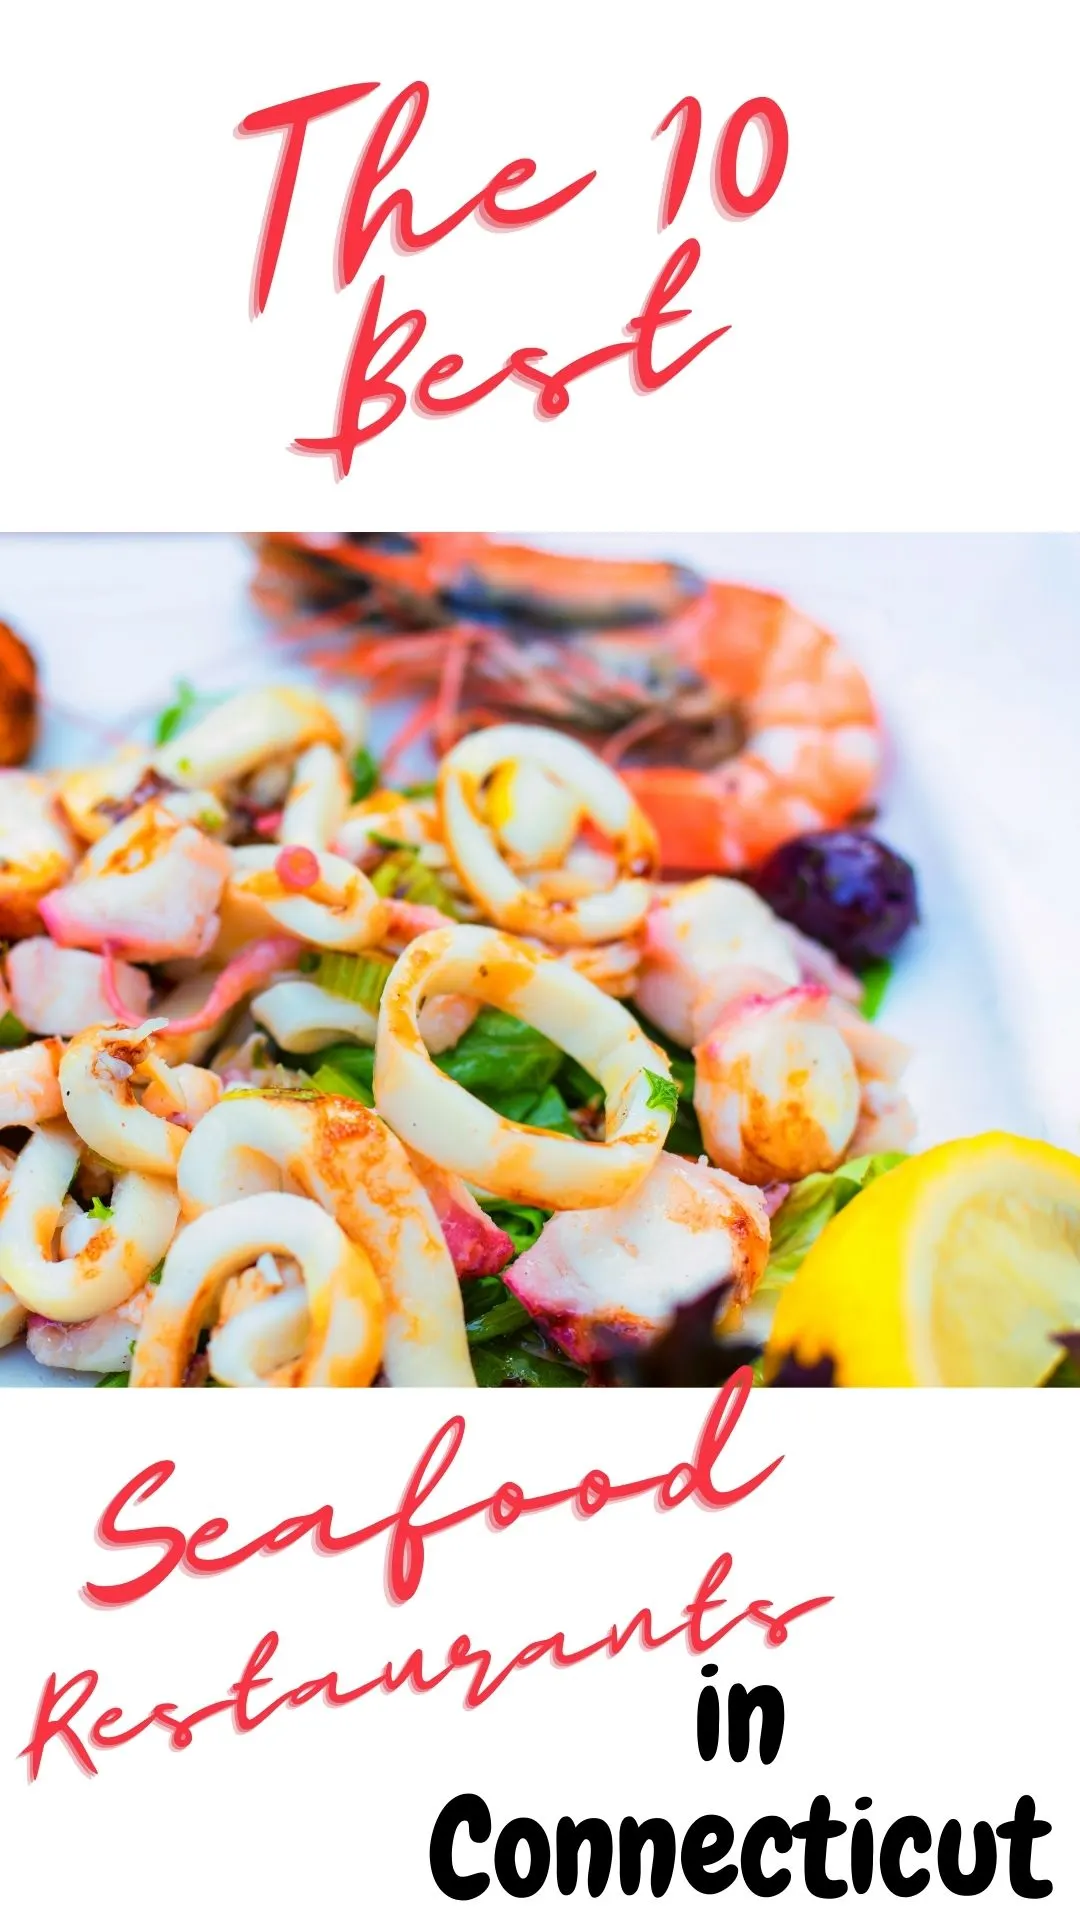 the 10 best seafood restaurants in ct pinterest image.